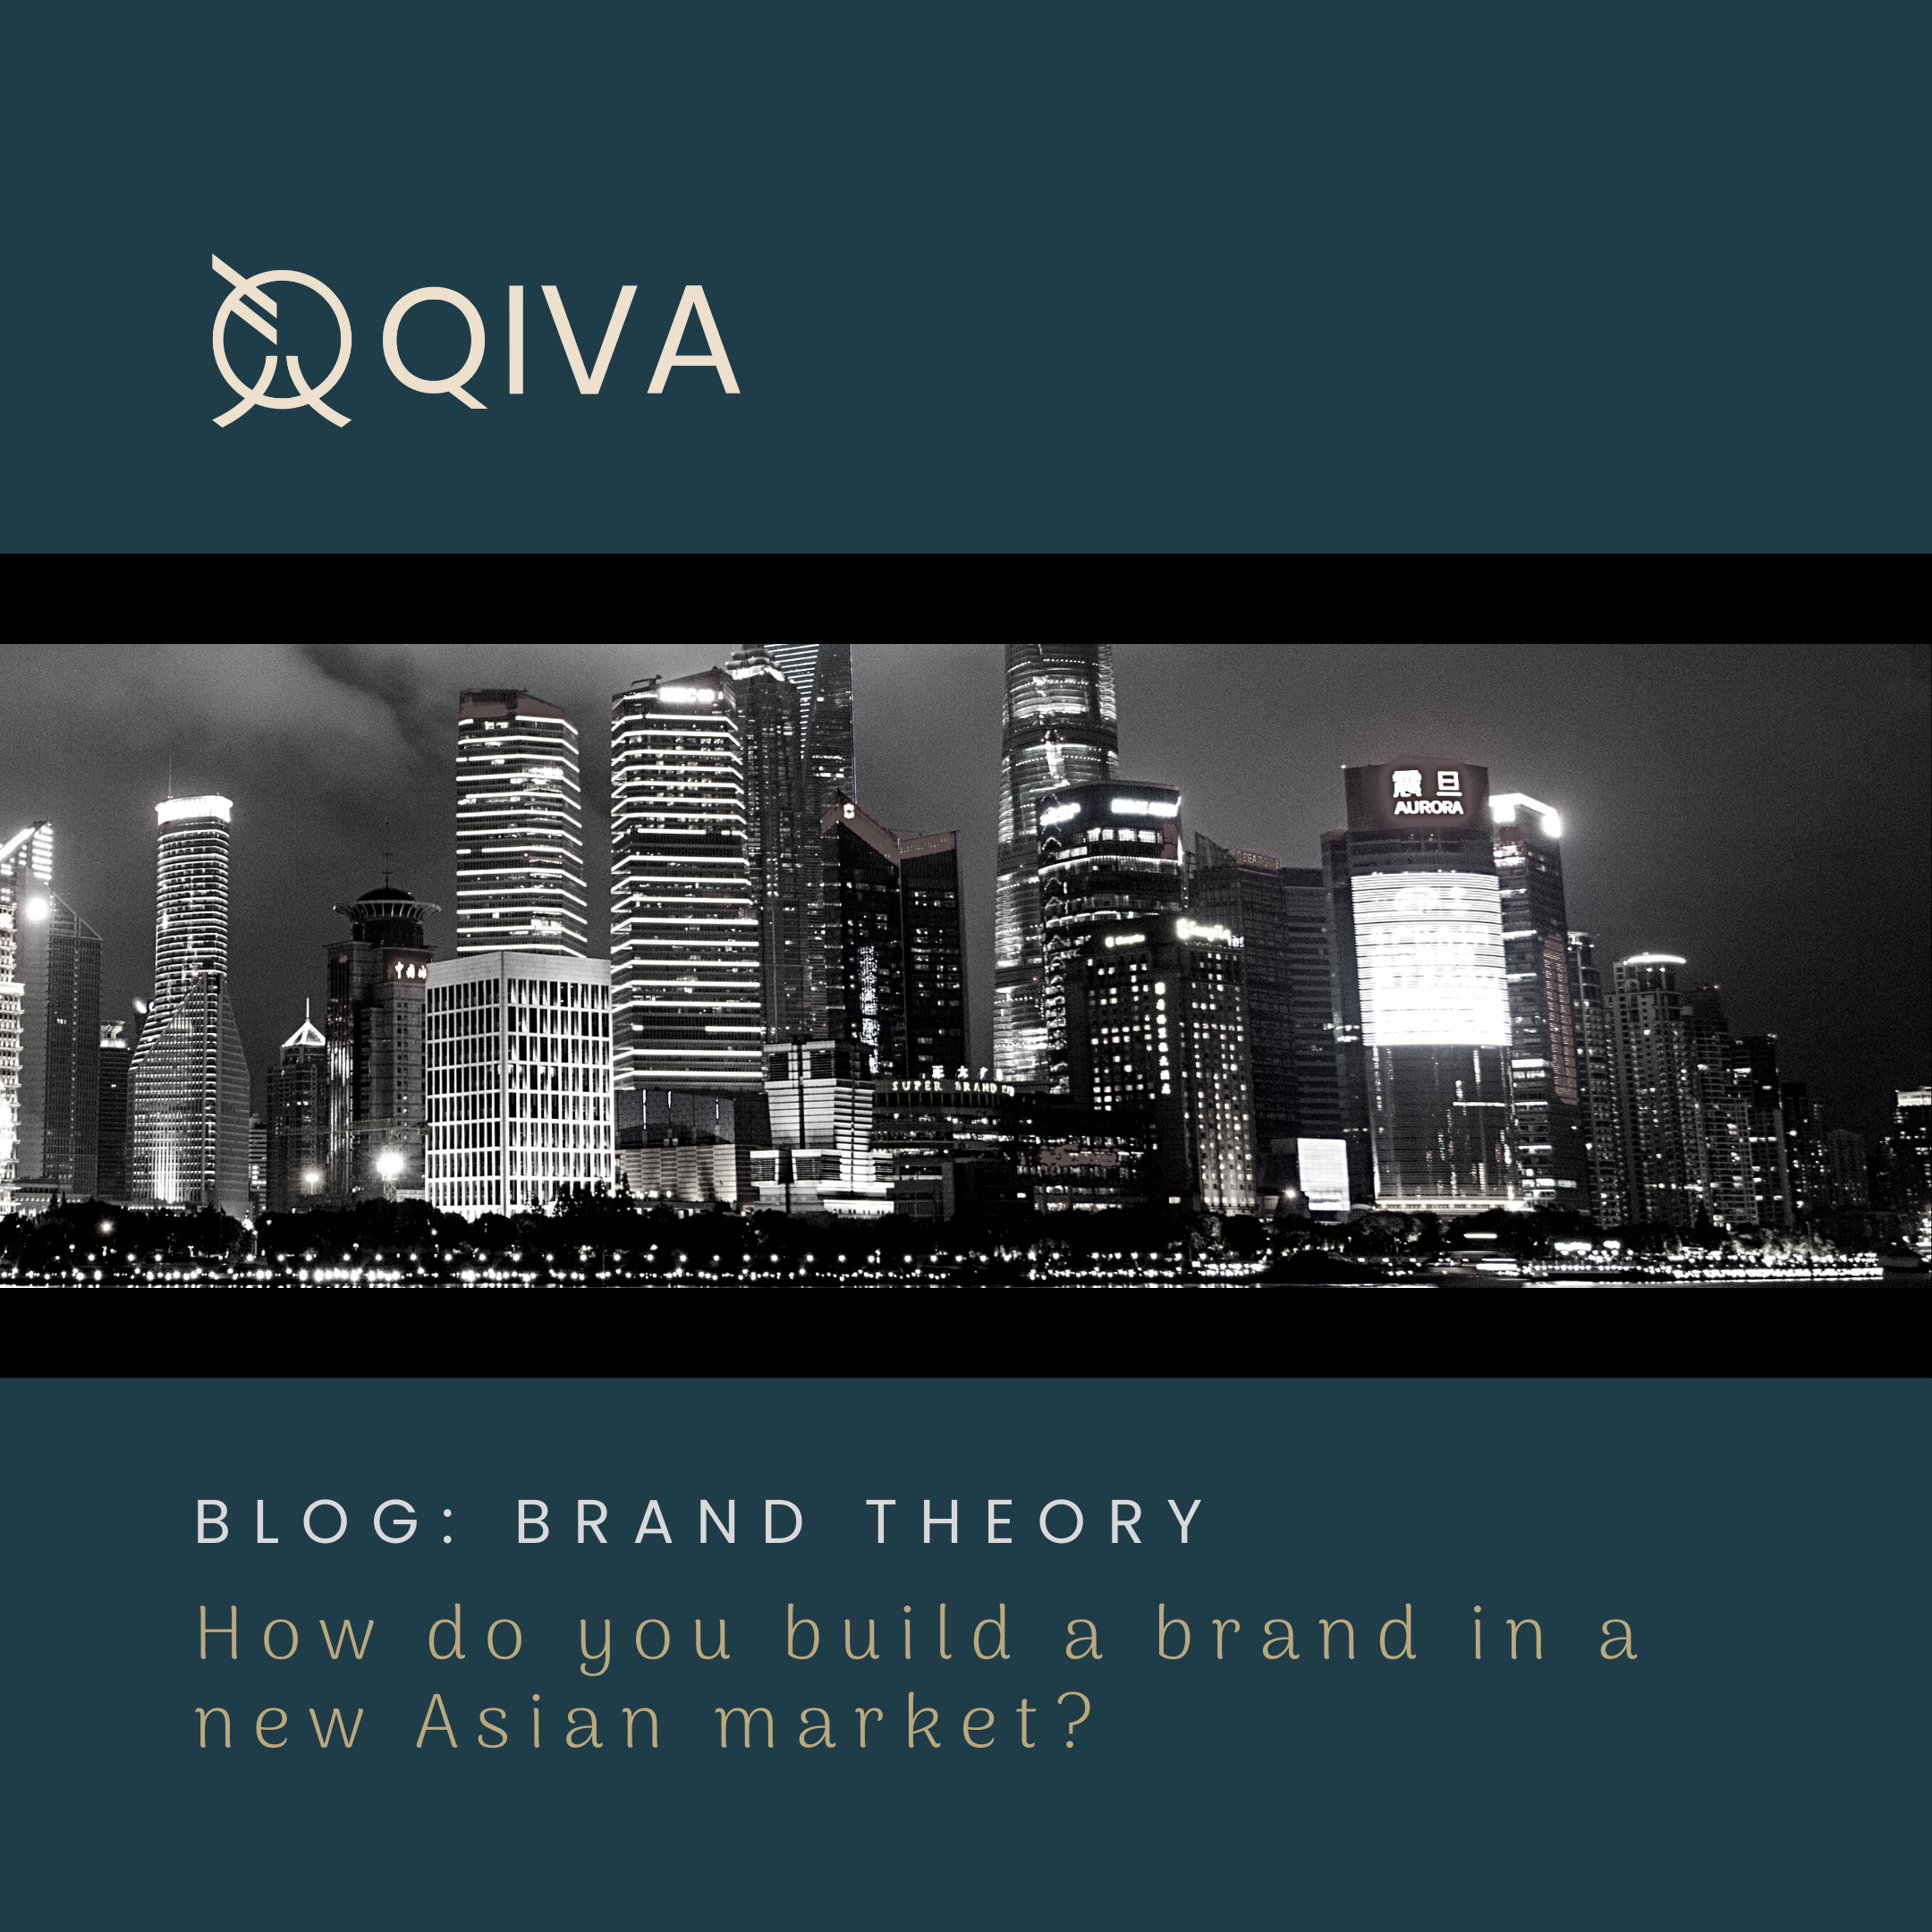 The power of brand theory: how do you build a brand in a new Asian market?